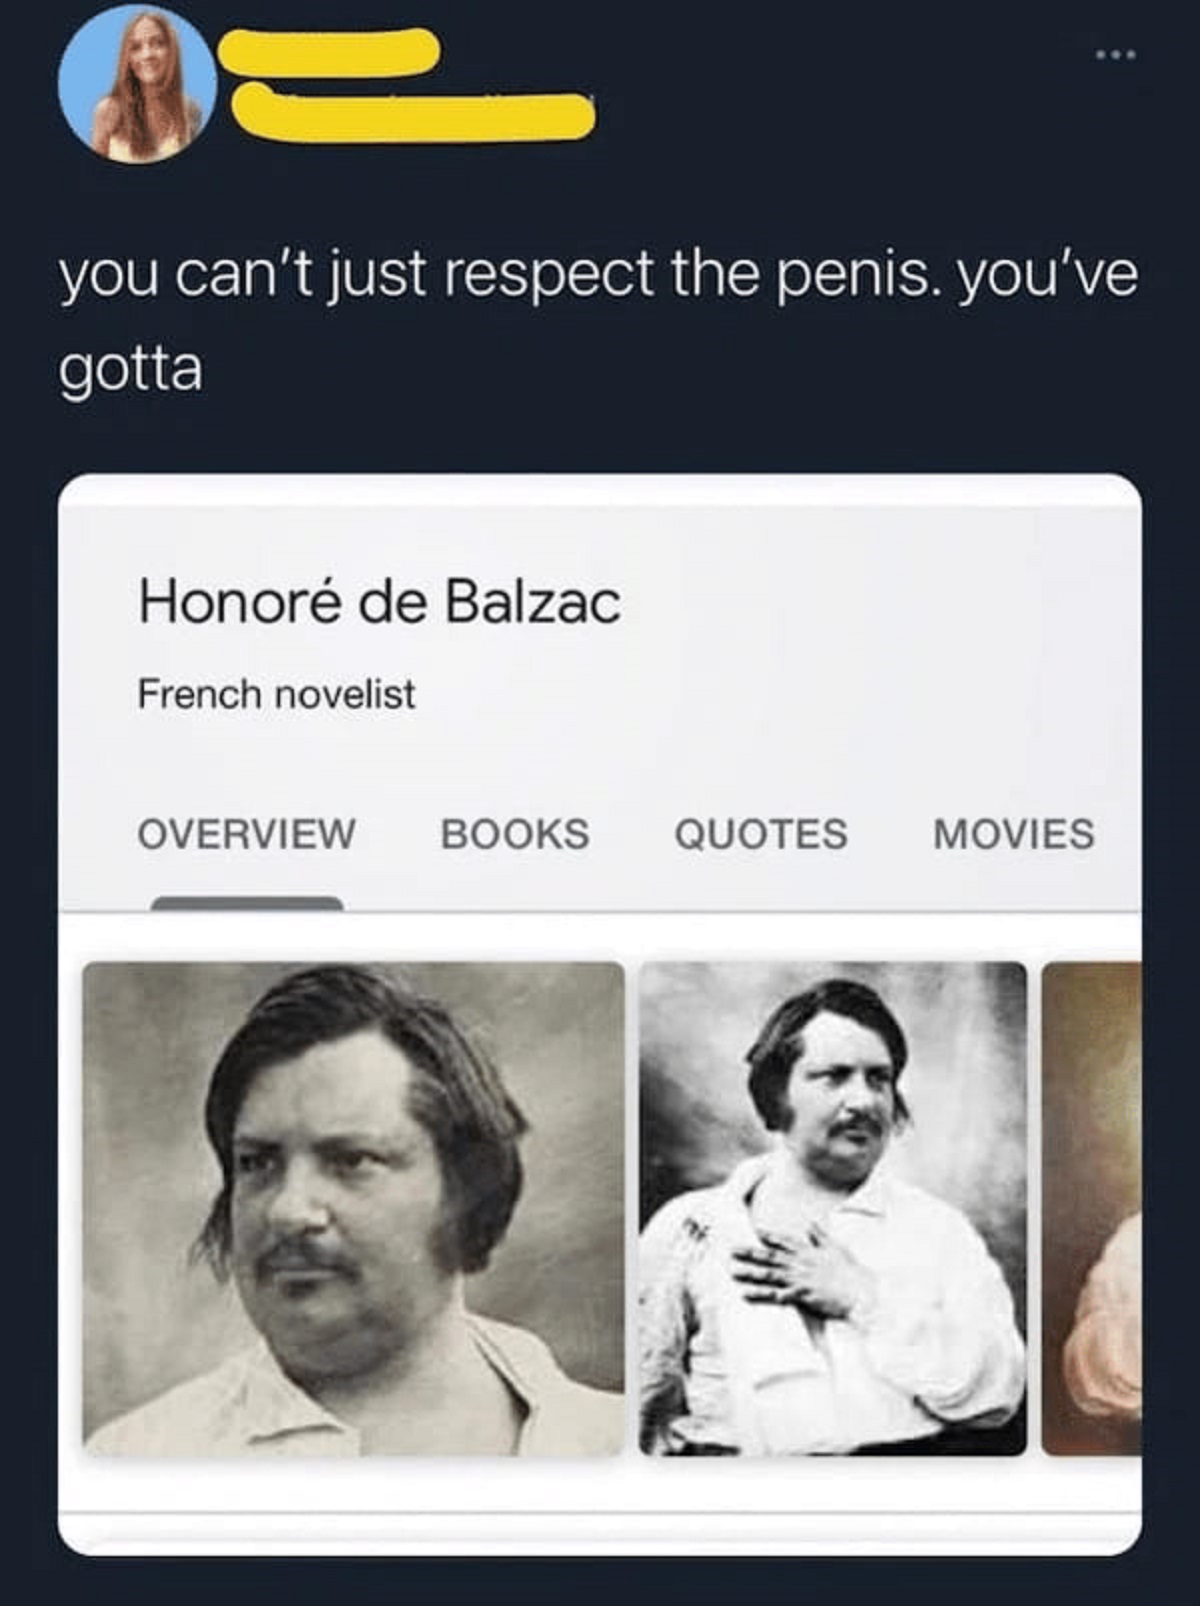 spicy memes -  media - L you can't just respect the penis. you've gotta Honor de Balzac French novelist Overview Books Quotes Movies